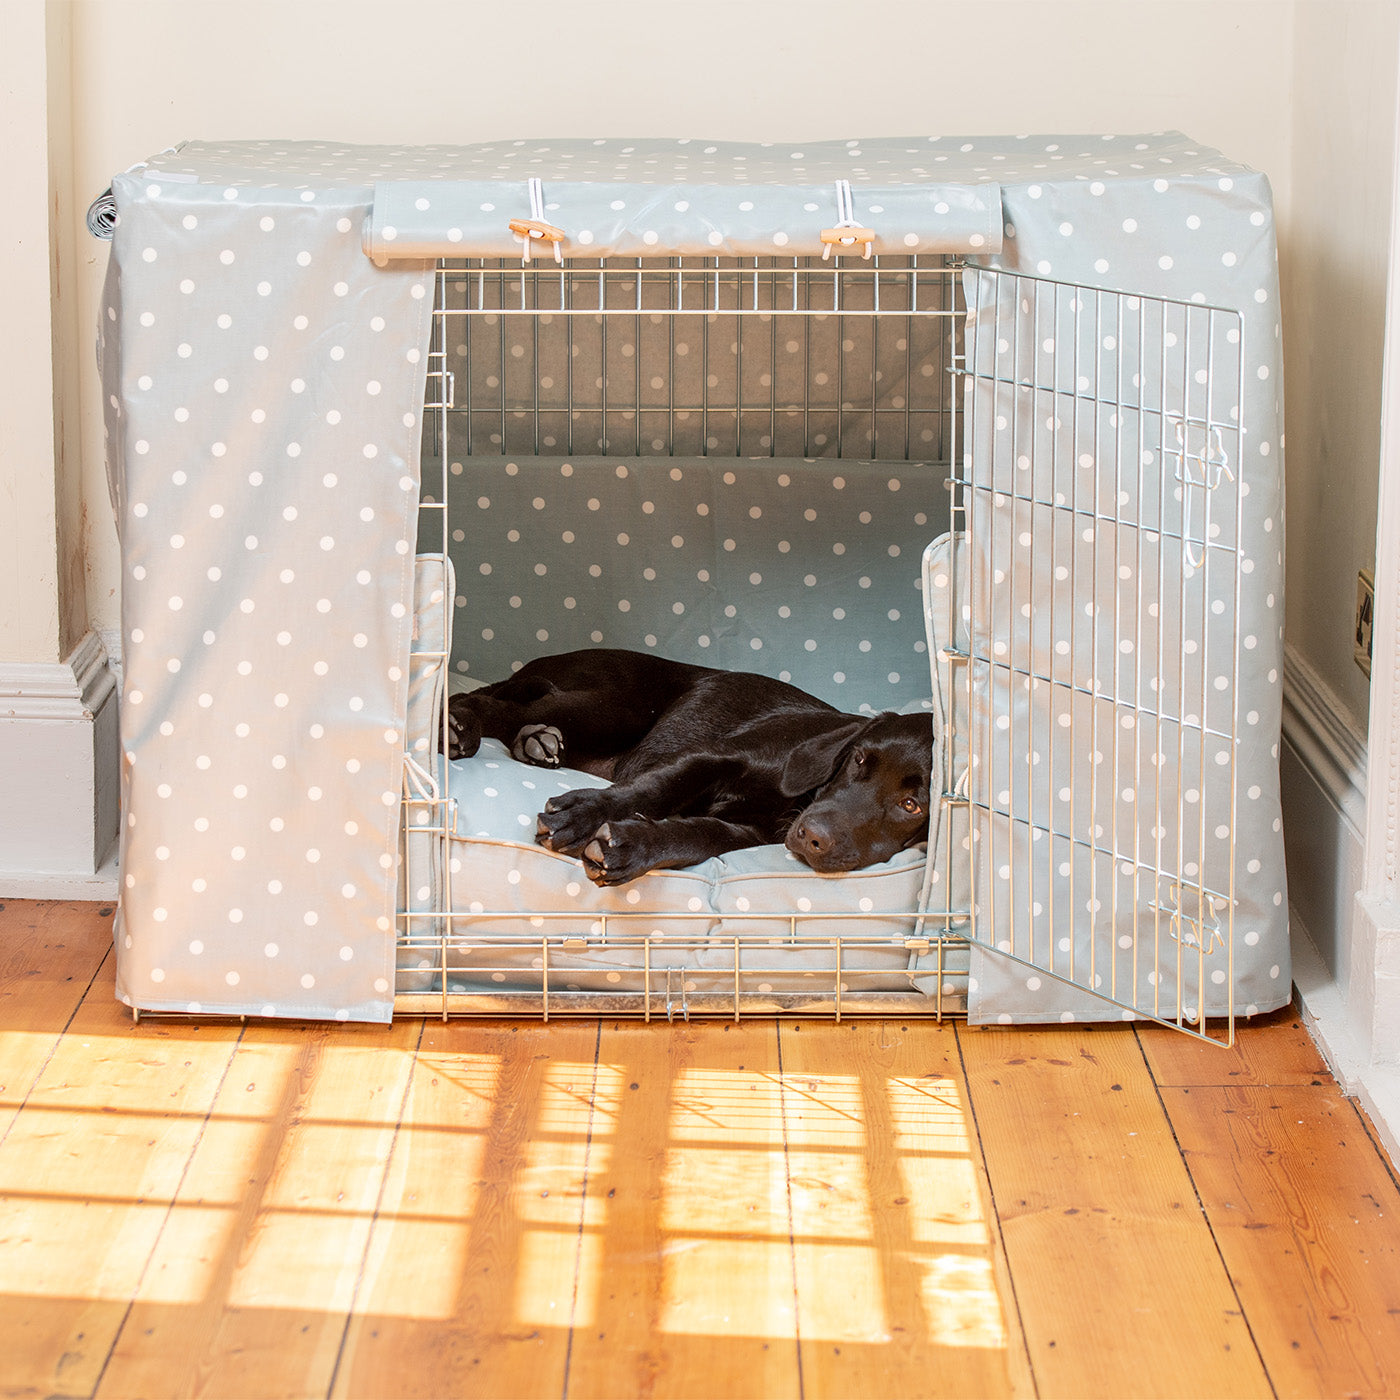 Luxury Heavy Duty Dog Cage, In Stunning Duck Egg Spot Oil Cloth Cage Set, The Perfect Dog Cage Set For Building The Ultimate Pet Den! Dog Cage Cover Available To Personalize at Lords & Labradors US